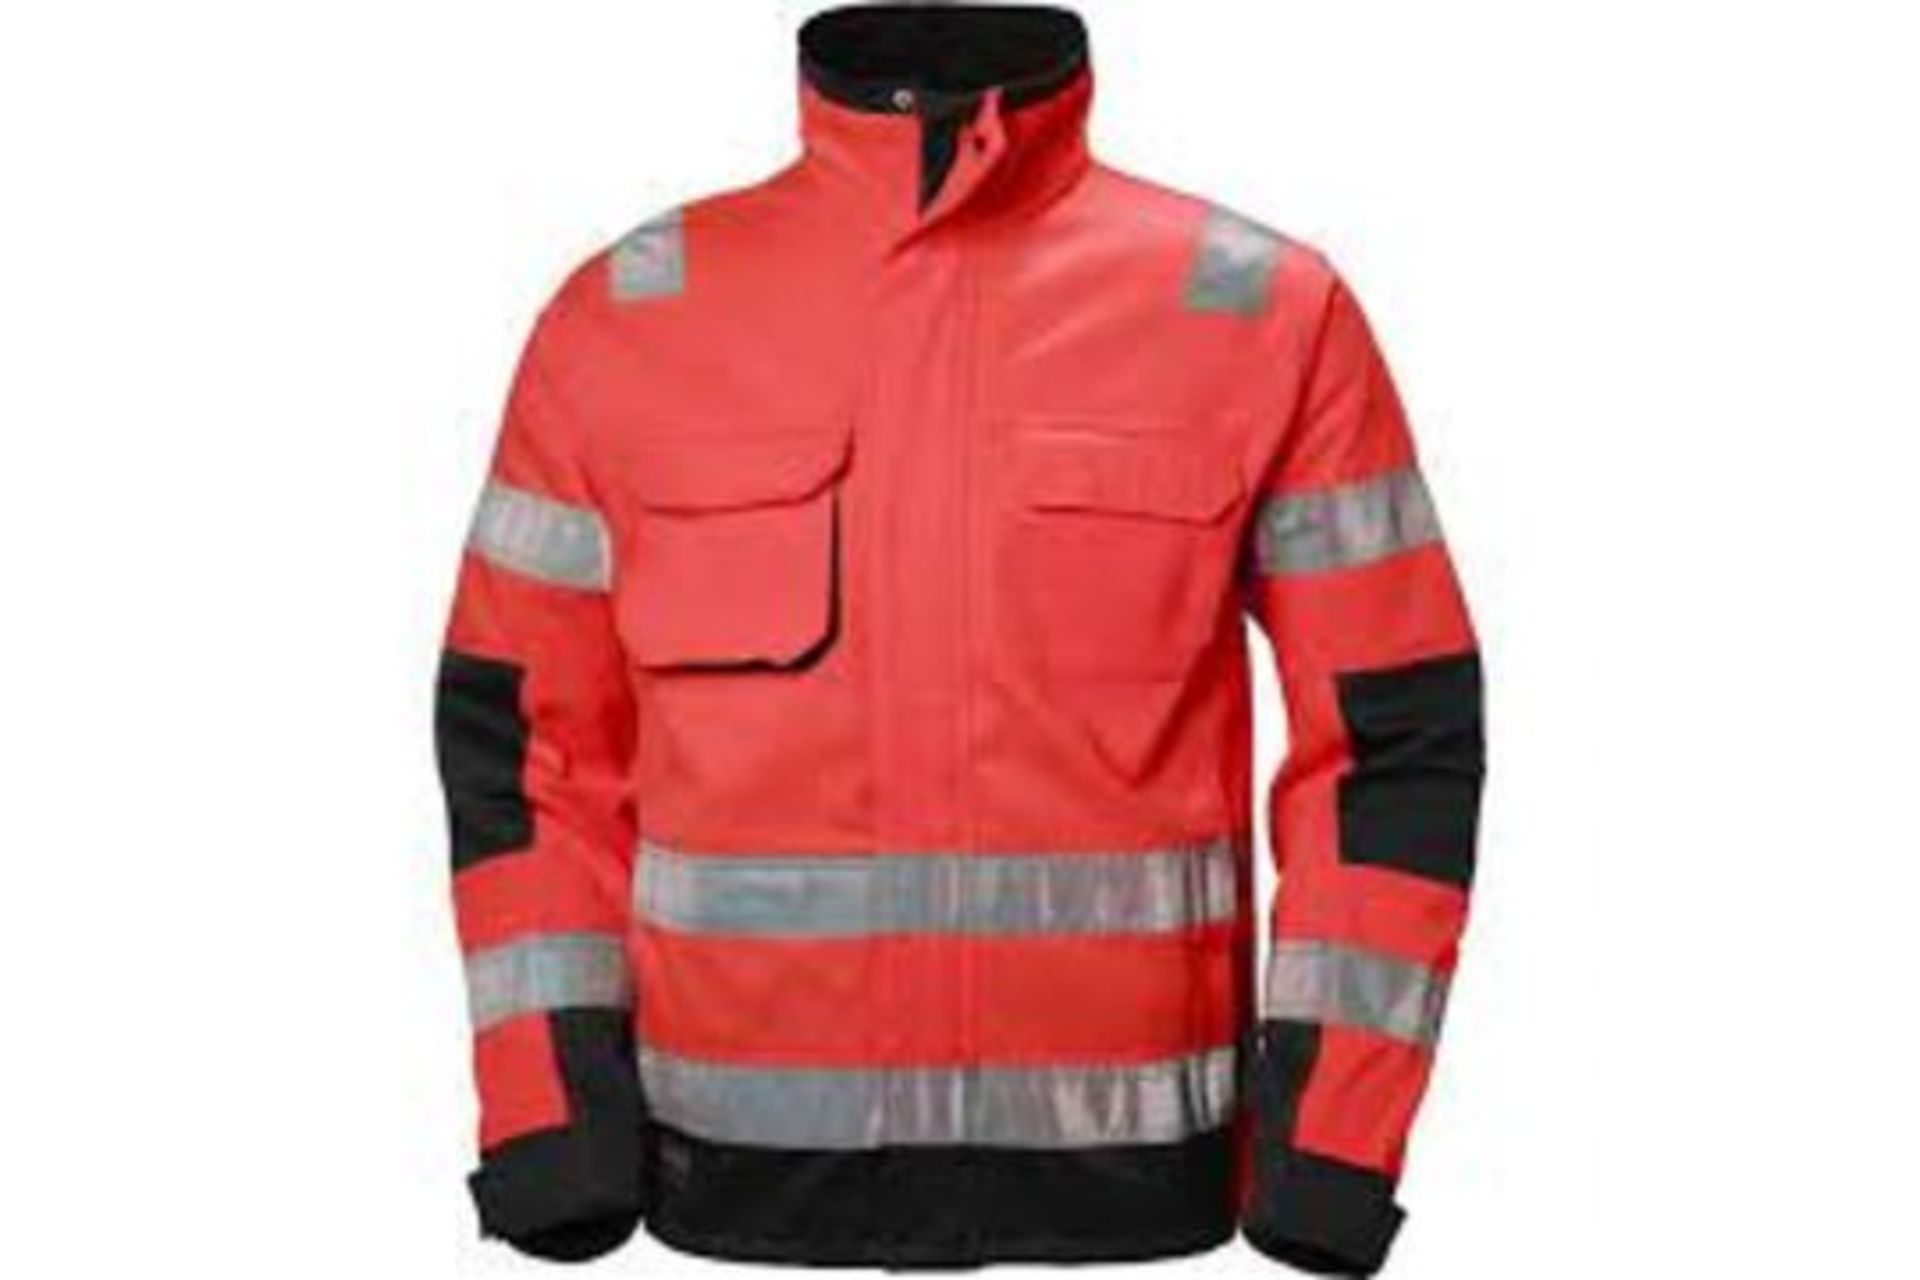 FULL ARTIC LOAD 24 X LARGE PALLETS OF ASSORTED WORKWEAR STOCK. PALLETS MAY INCLUDE ITEMS SUCH AS: